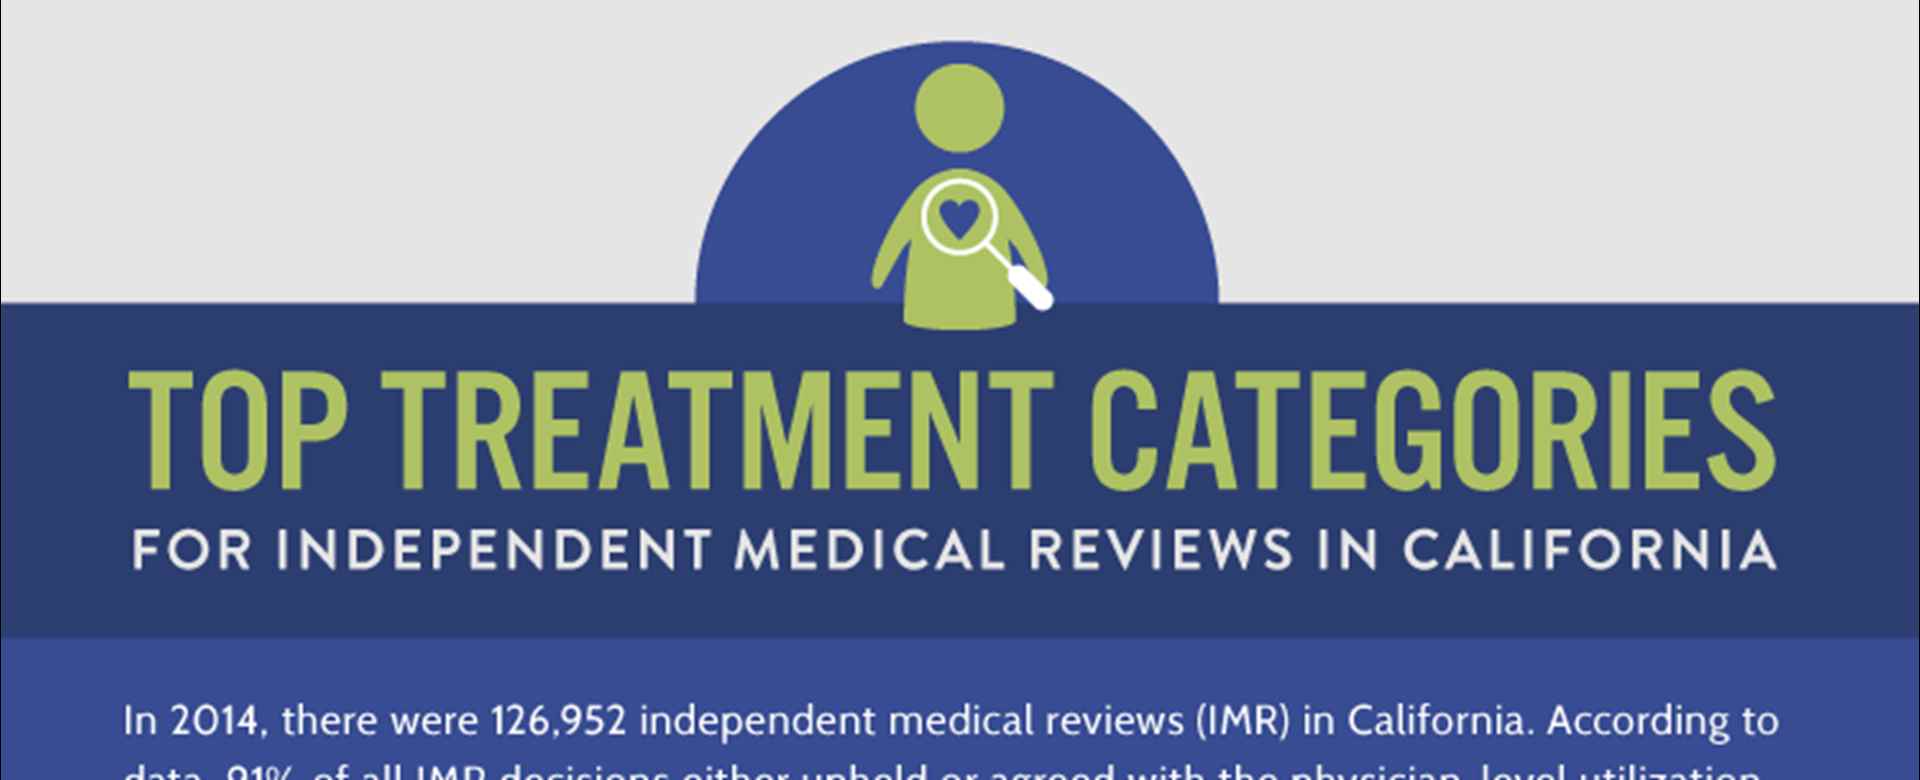 Treatment Categories for Independent Medical Reviews in CA [Infographic]